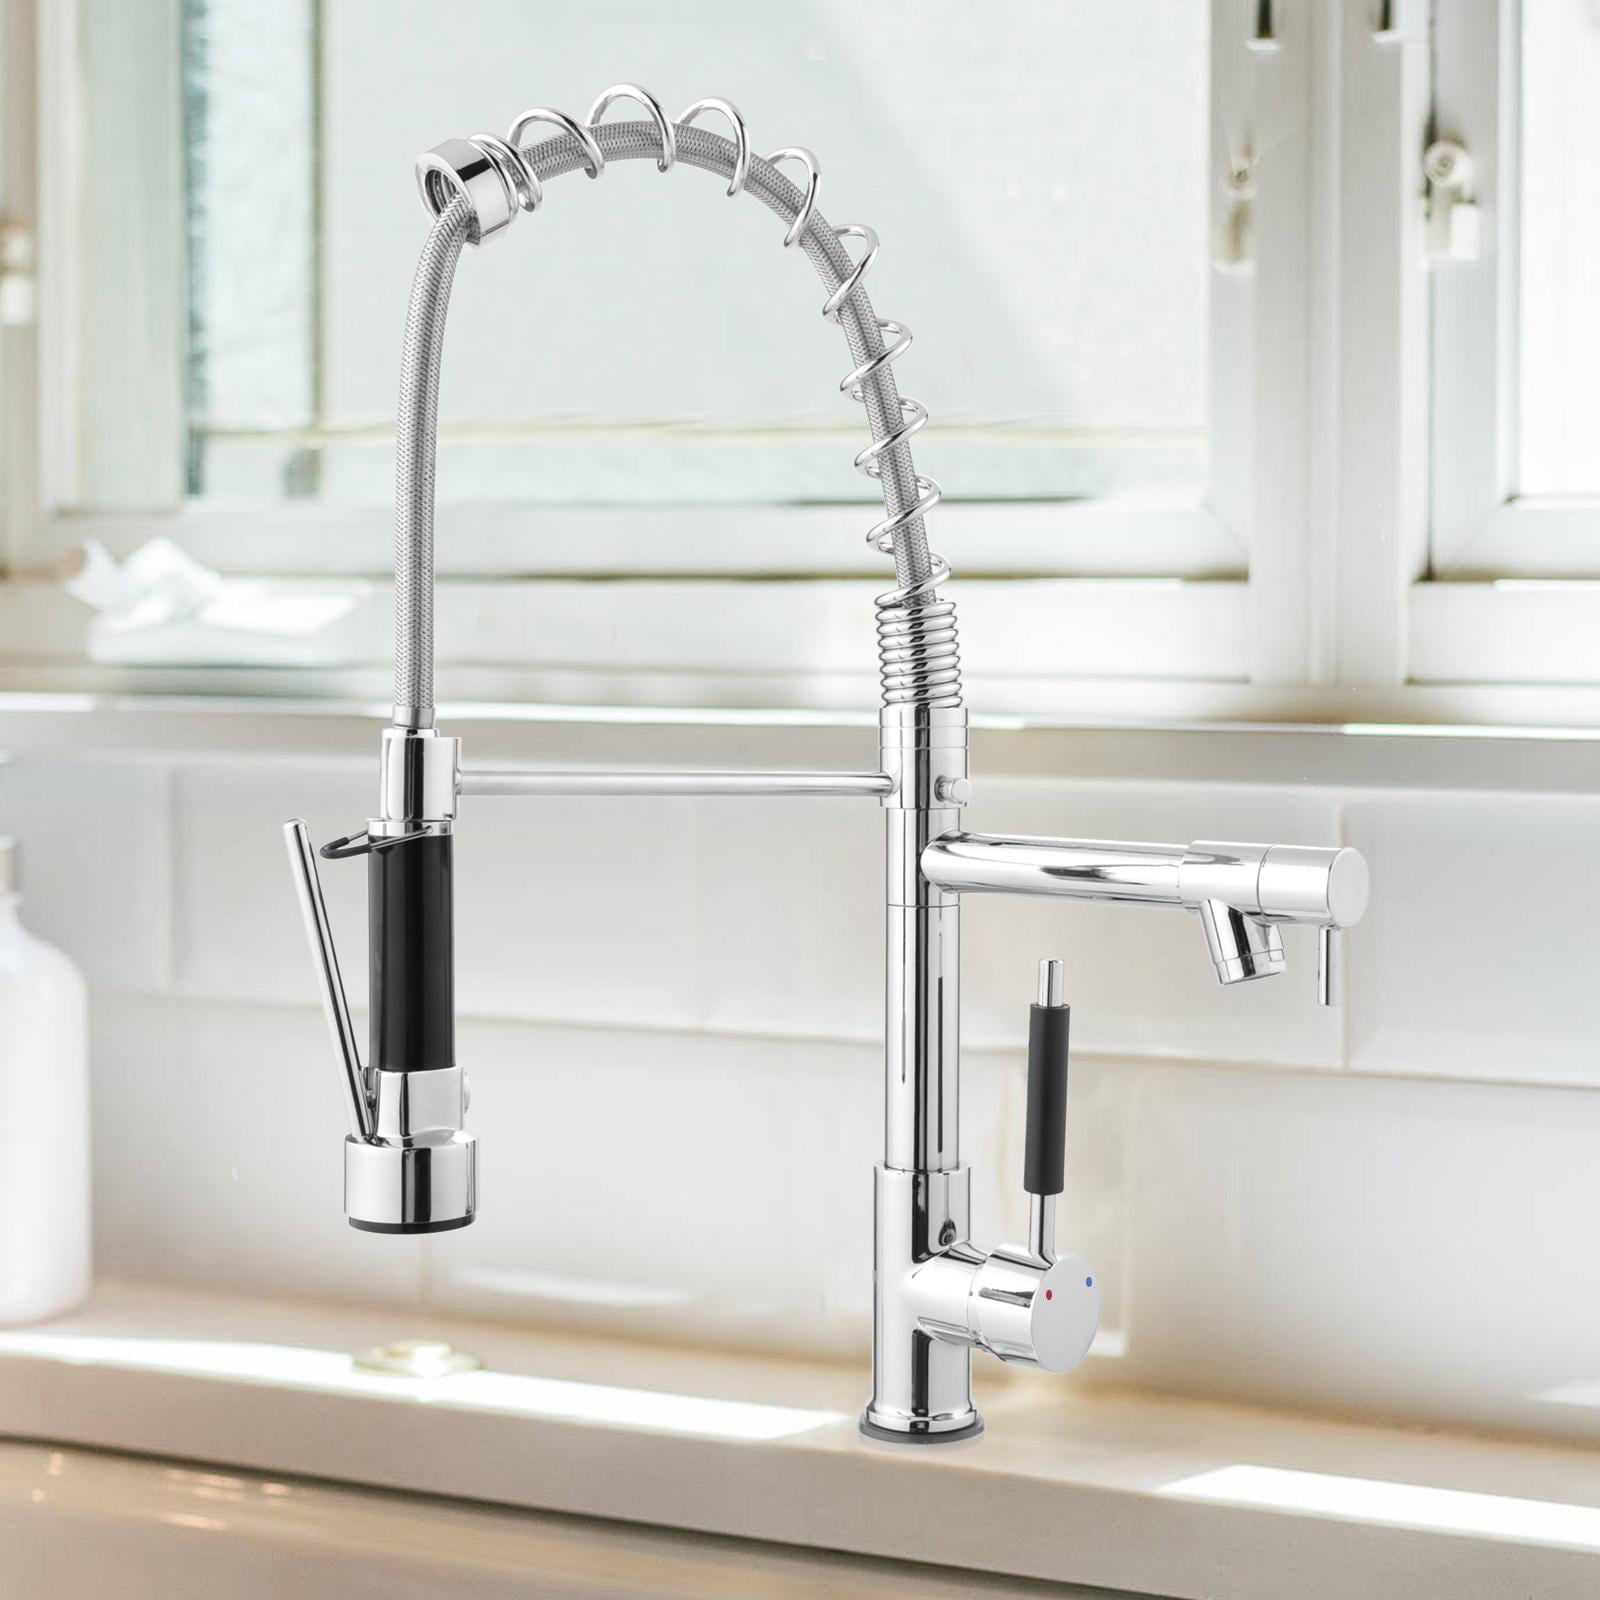 Details about   Household Kitchen Faucet Nozzle Neu Faucet Rotary Water-saving Aeration Faucet 